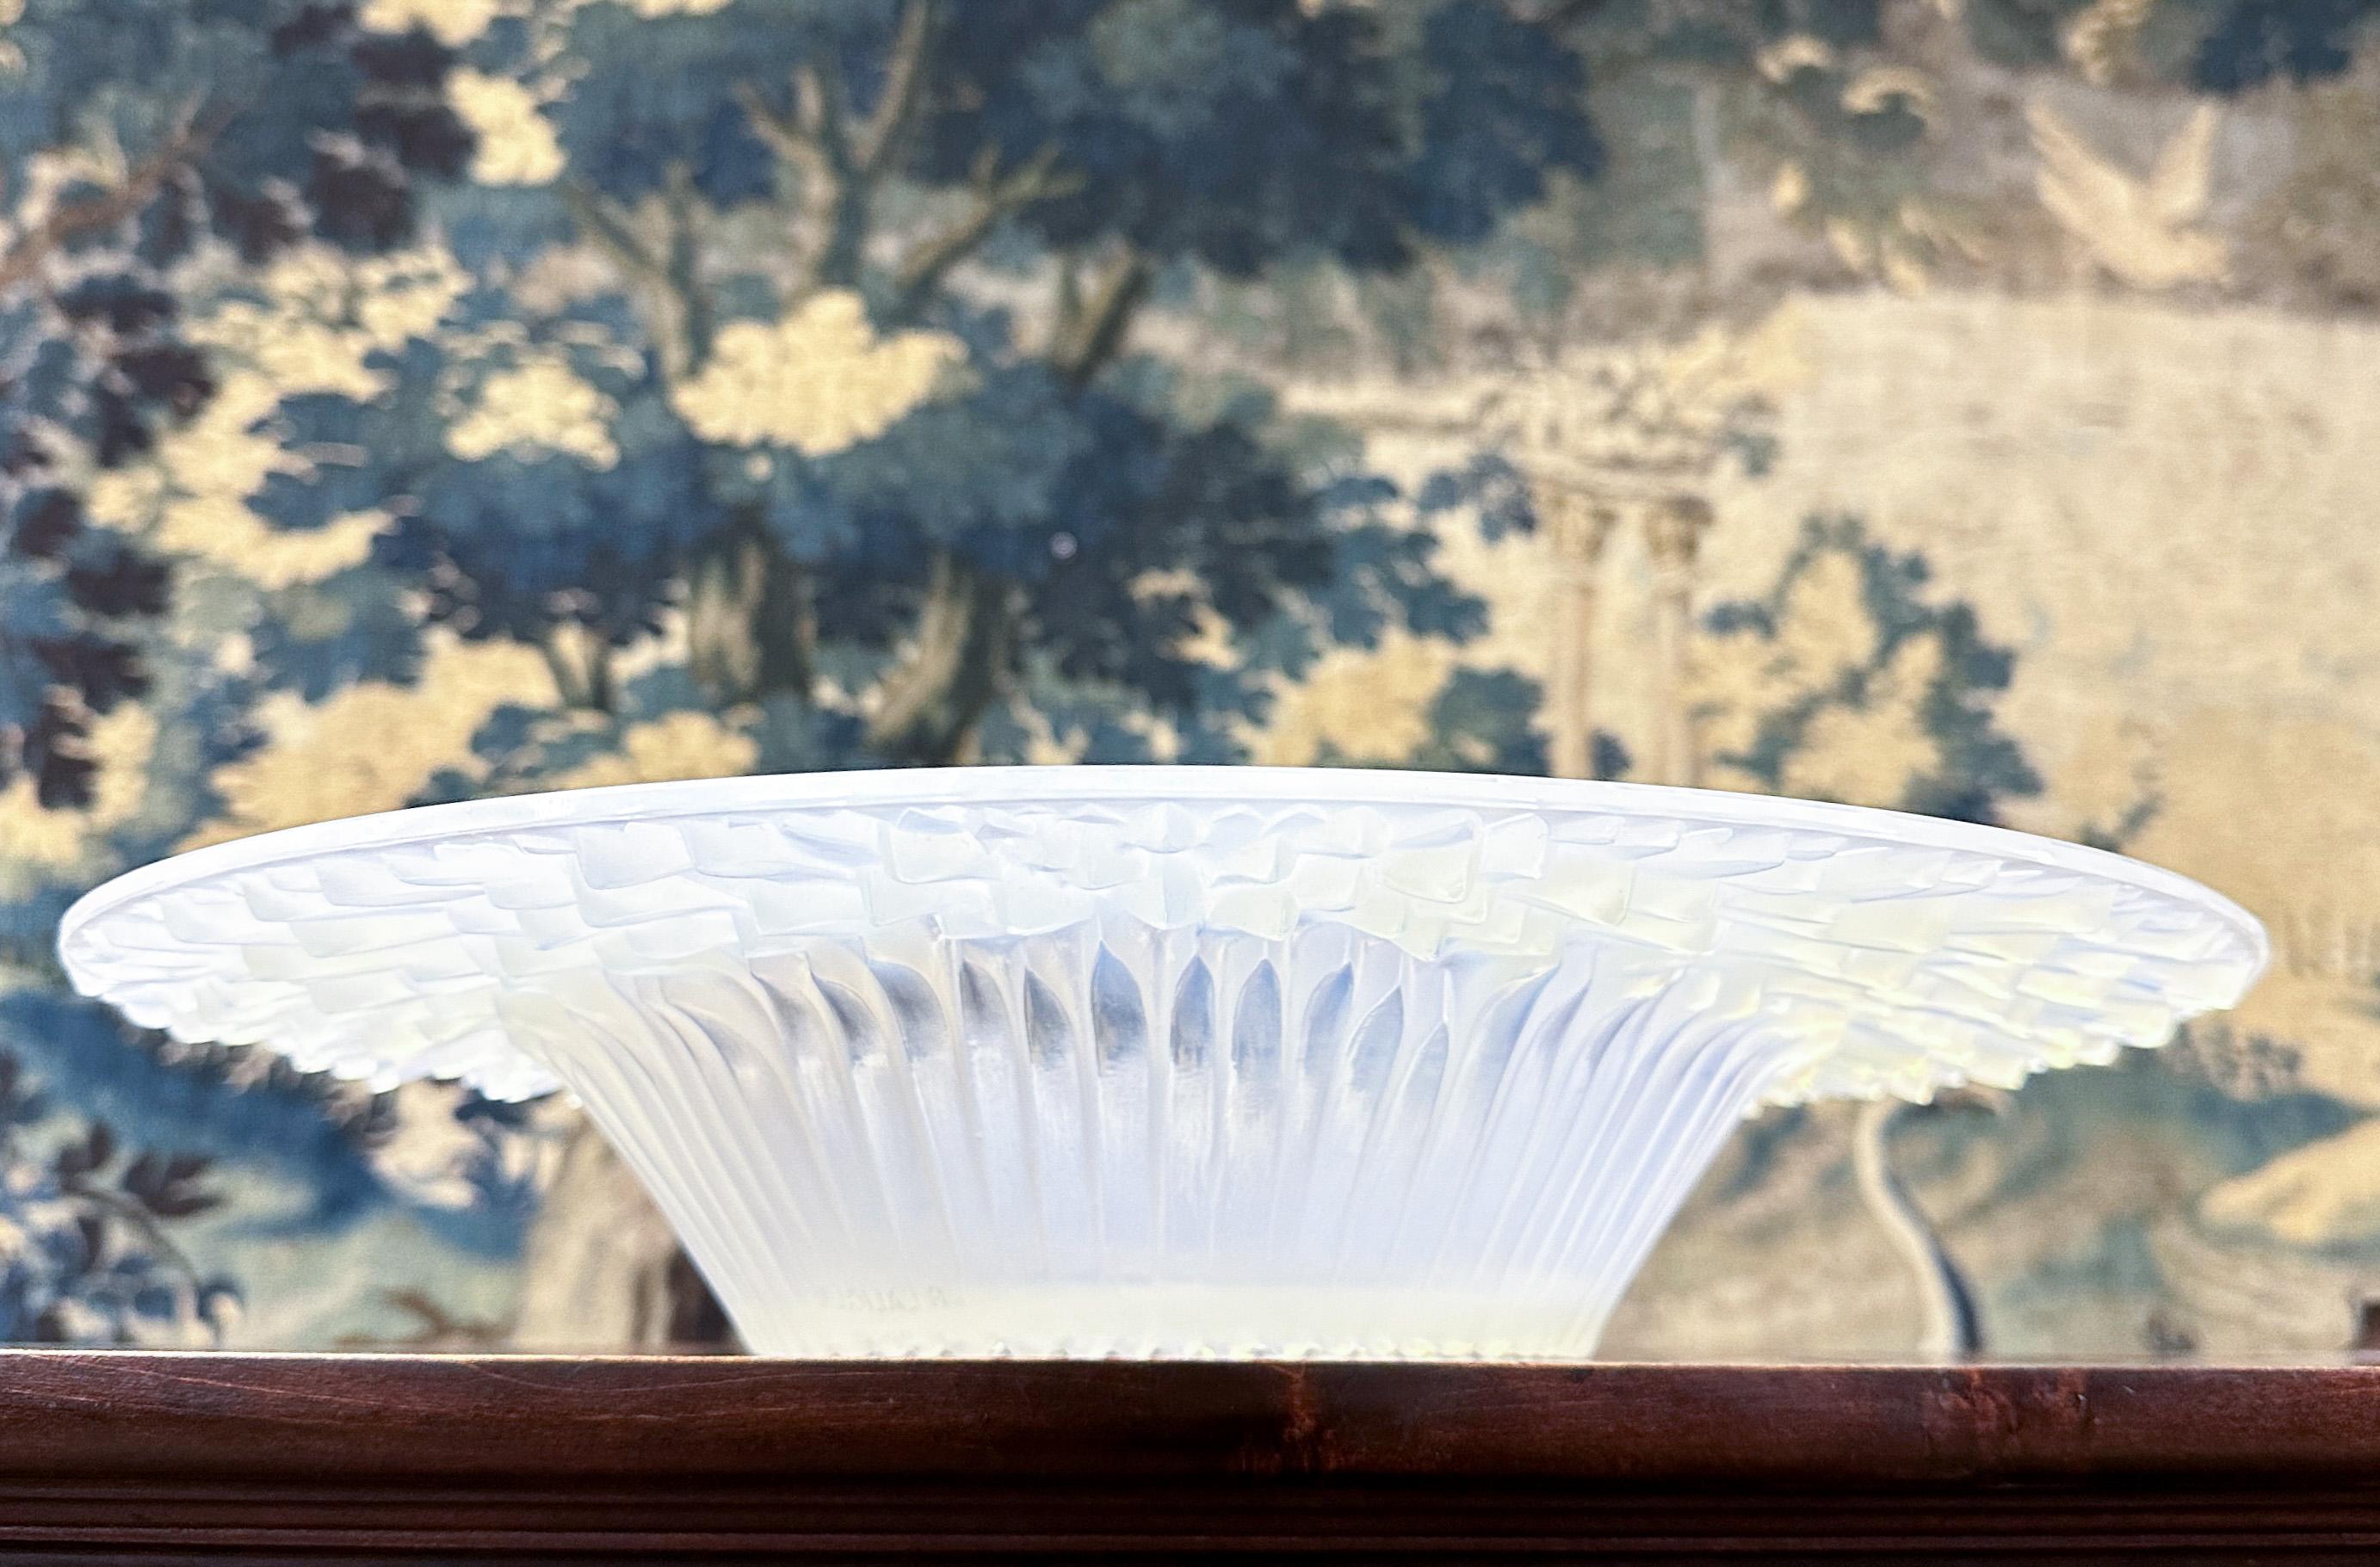 Large molded glass bowl, Flora Bella model. Model created in 1930 by René Lalique after a drawing by his daughter Suzanne. Opalescent white speckled transparent glass bowl. Signature in the hollow decoration. Very beautiful decoration of flower